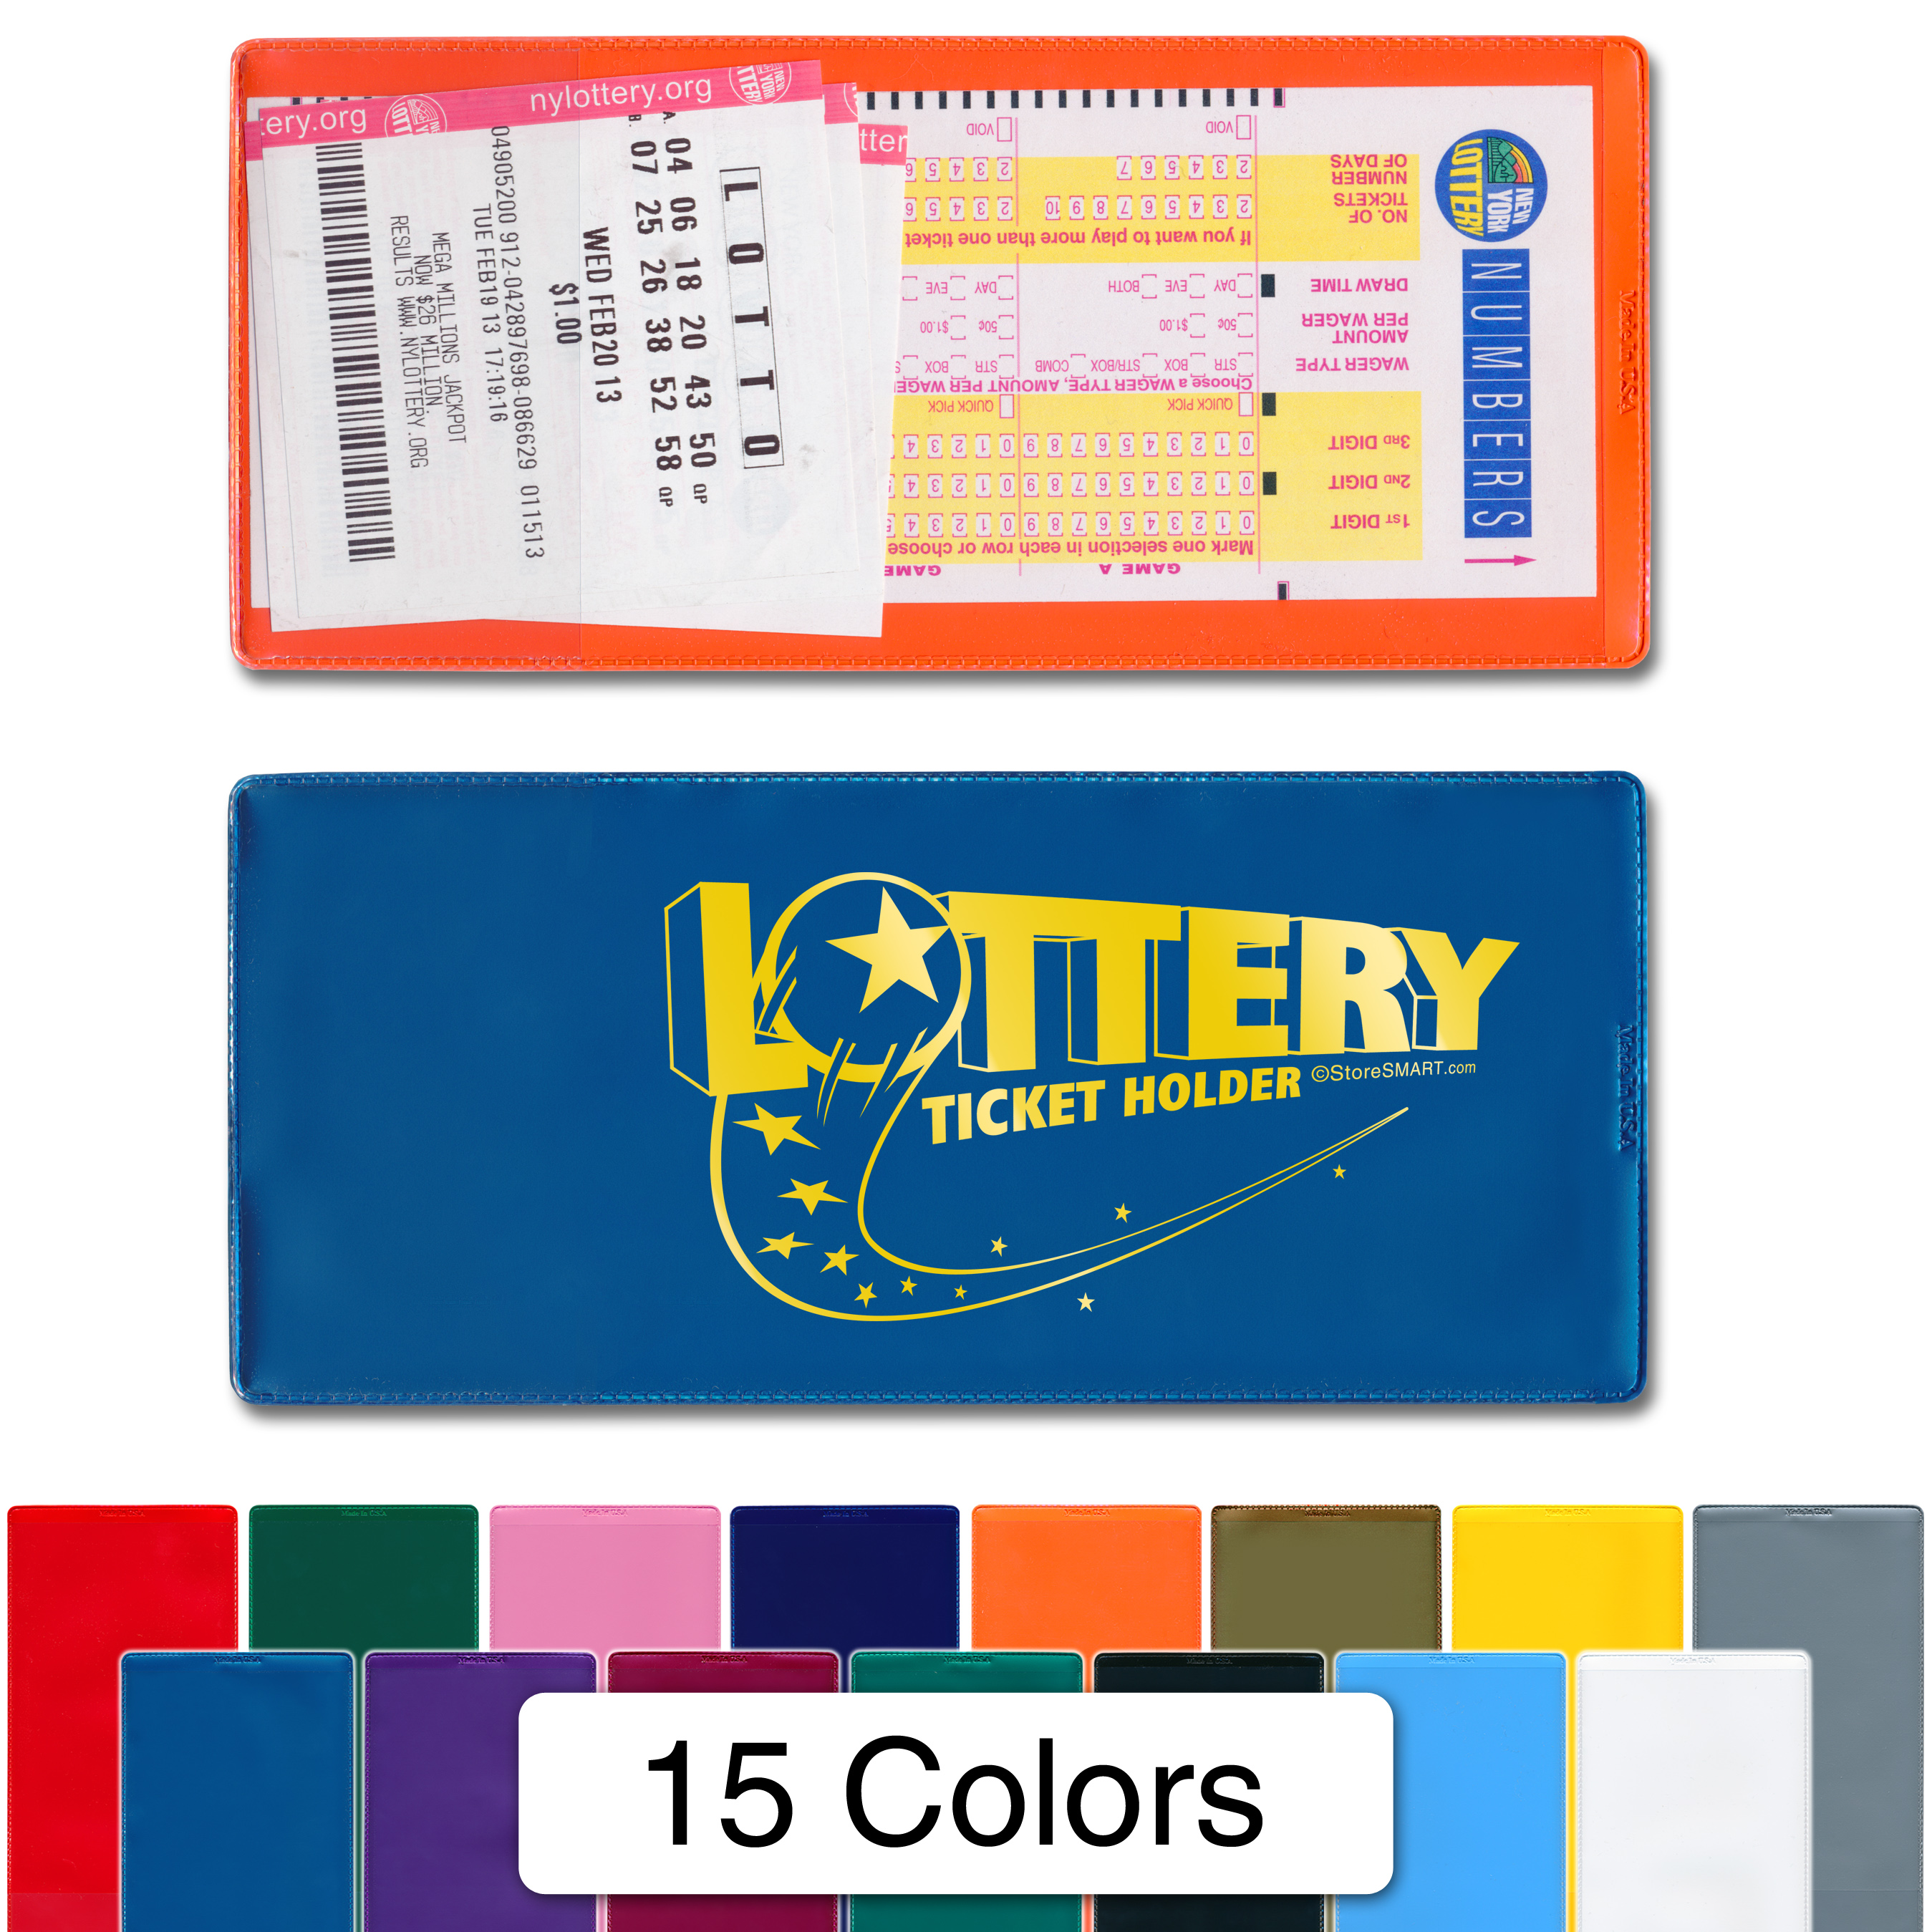 Storesmart - Lotto Ticket Holders 5-Pack - Plastic - Passionate Primary Collection (LTPAS)